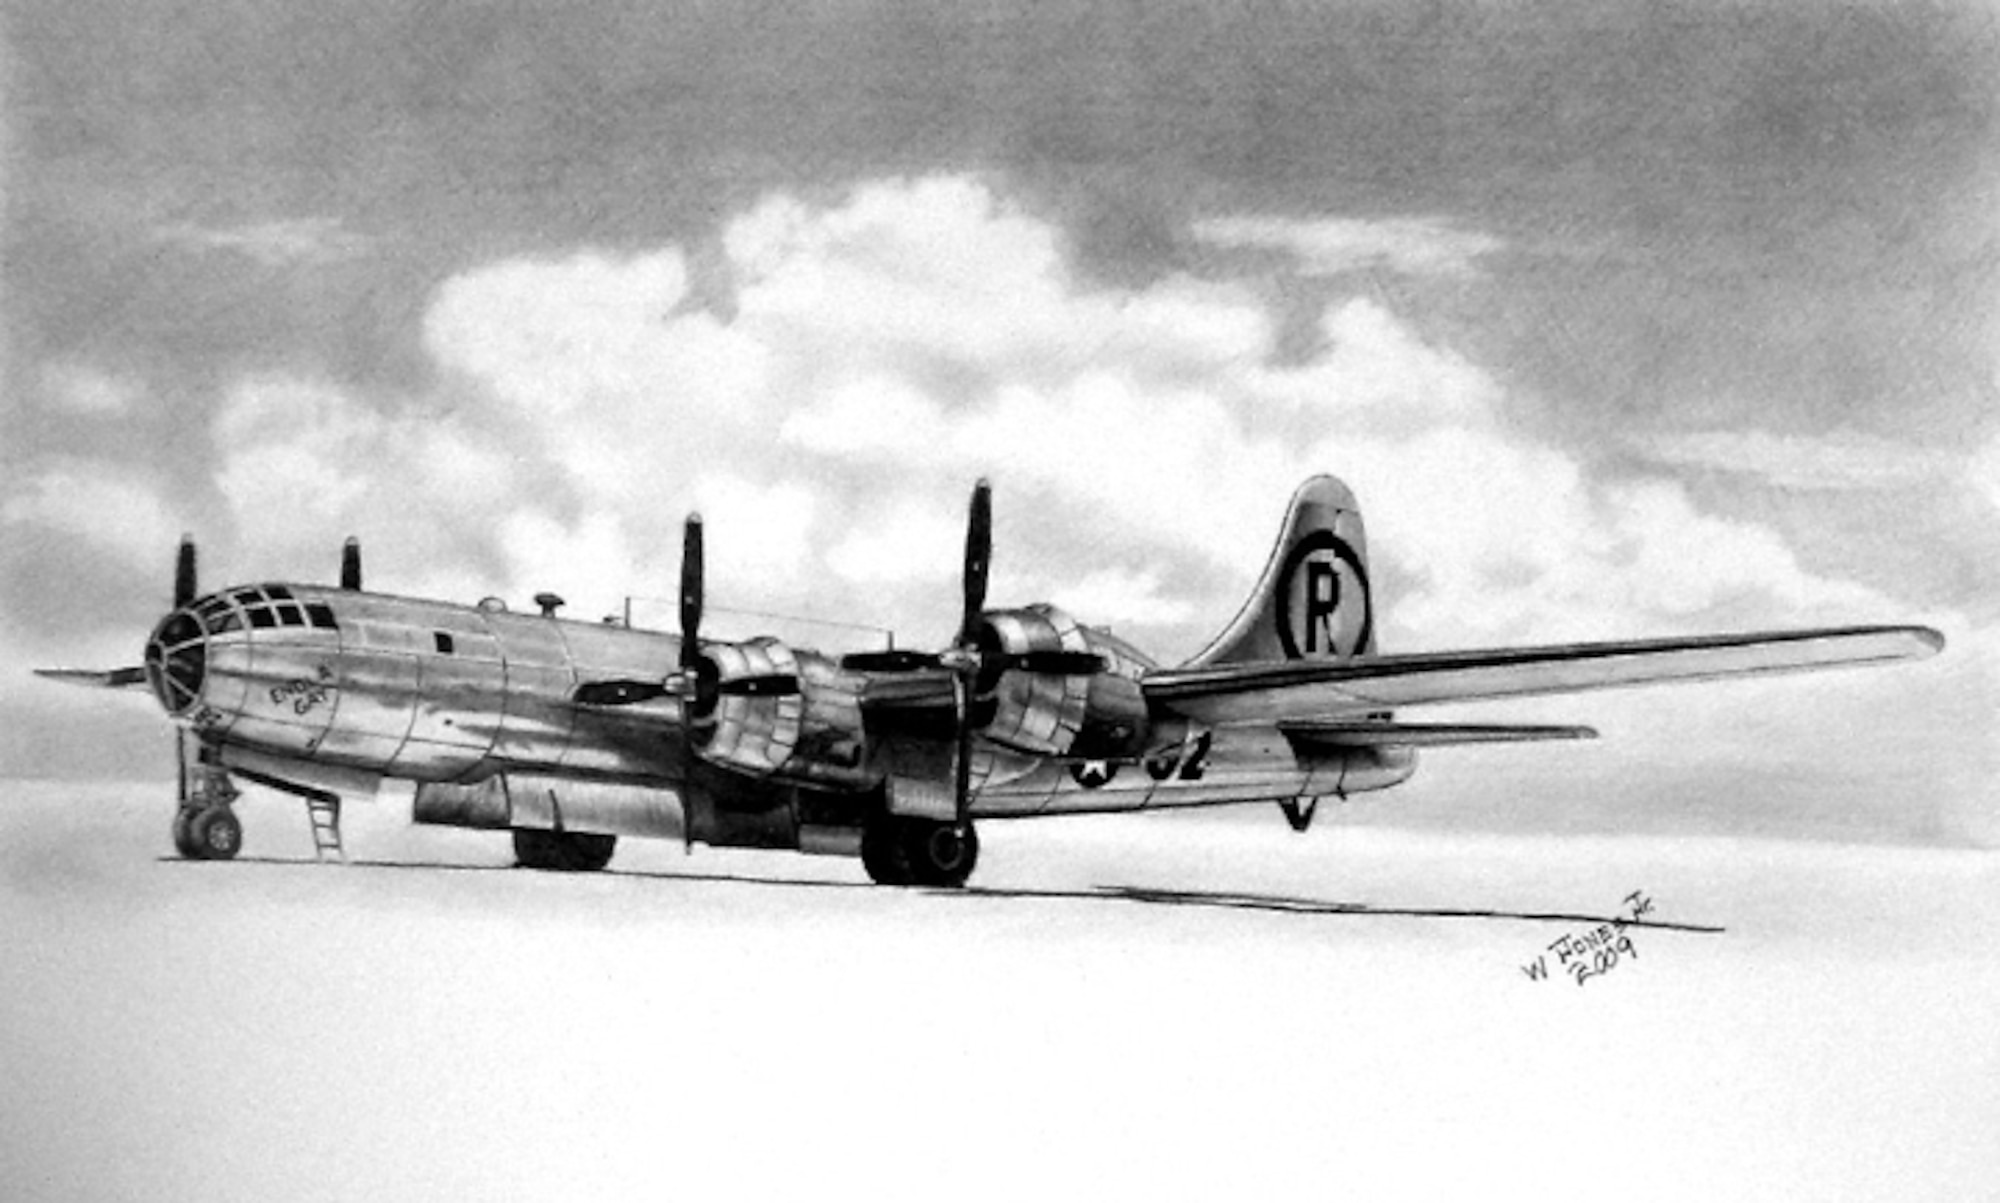 B-29 Super Fortress "Enola Gay"  Art by Willie Jones. This image is copyrighted and is the property of Willie Jones Jr. and is available only to members of the Armed Forces and Military organizations.  B-29 was the US Army Air Forces very heavy bomber during World War II.  The B-29 "Enola Gay" dropped the first atomic bomb during World War II on Japan.  The B-29 could carry 20,000 pounds of bombs over 3000 miles.  